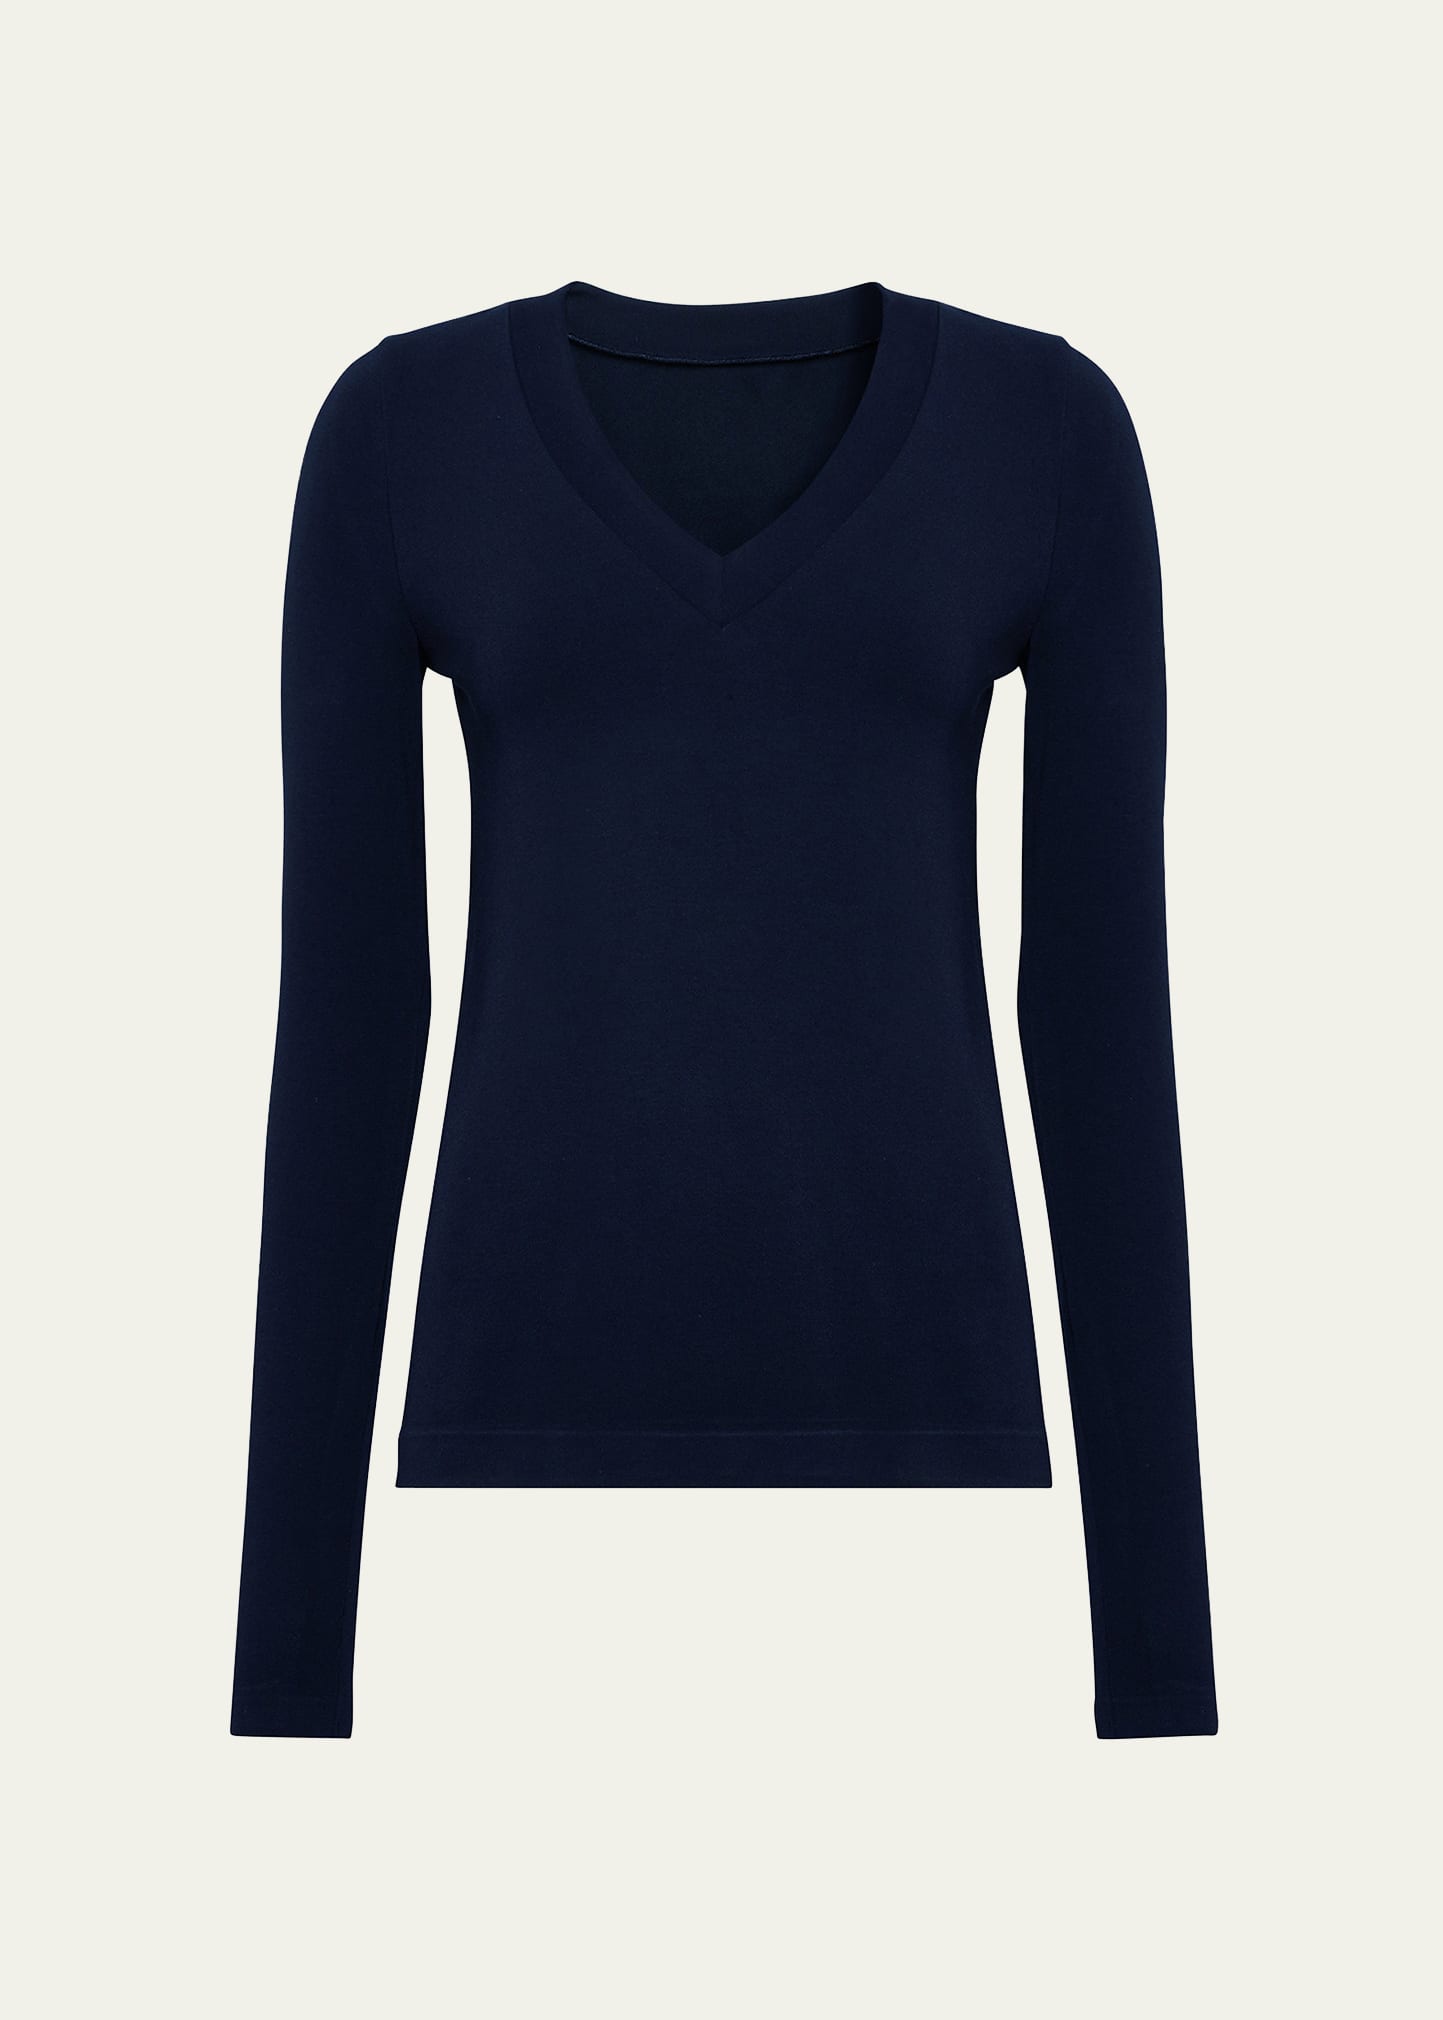 WOLFORD AURORA V-NECK LONG-SLEEVE TOP